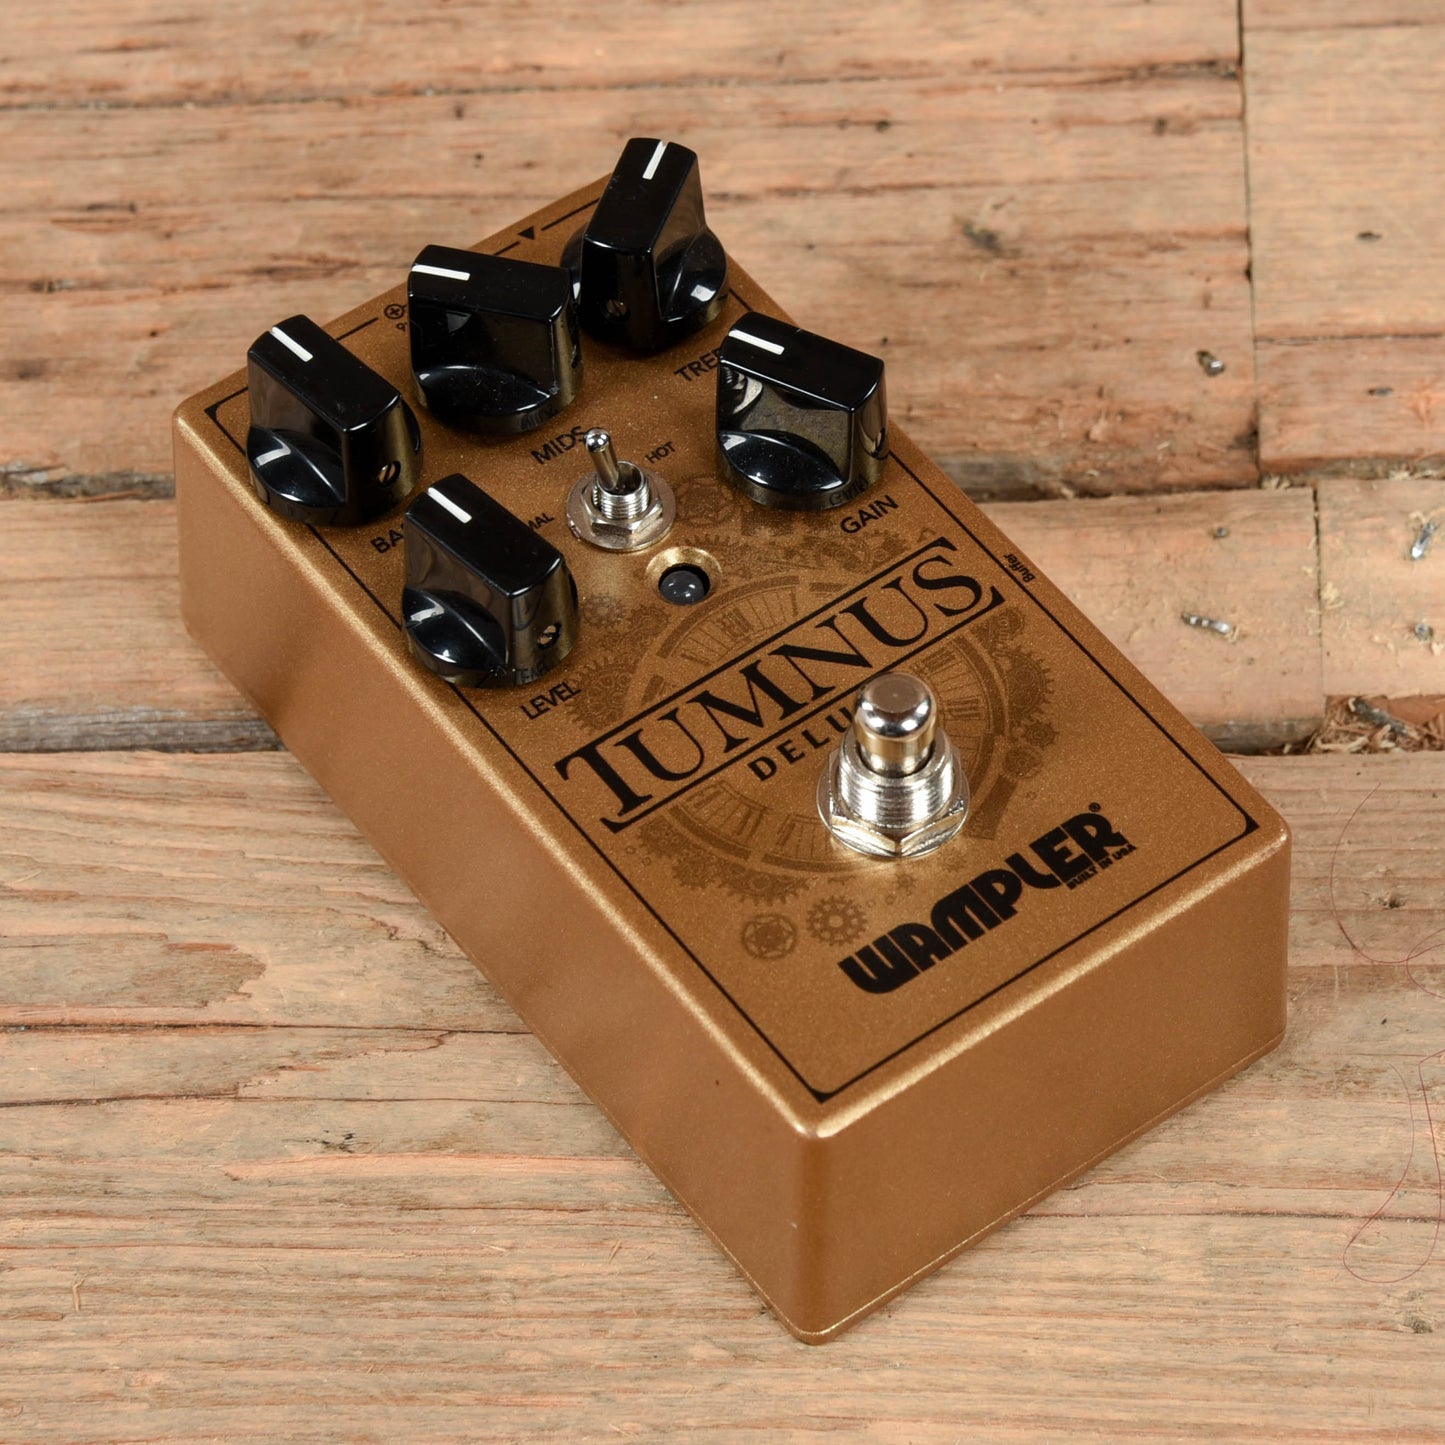 Wampler Tumnus Deluxe Effects and Pedals / Overdrive and Boost